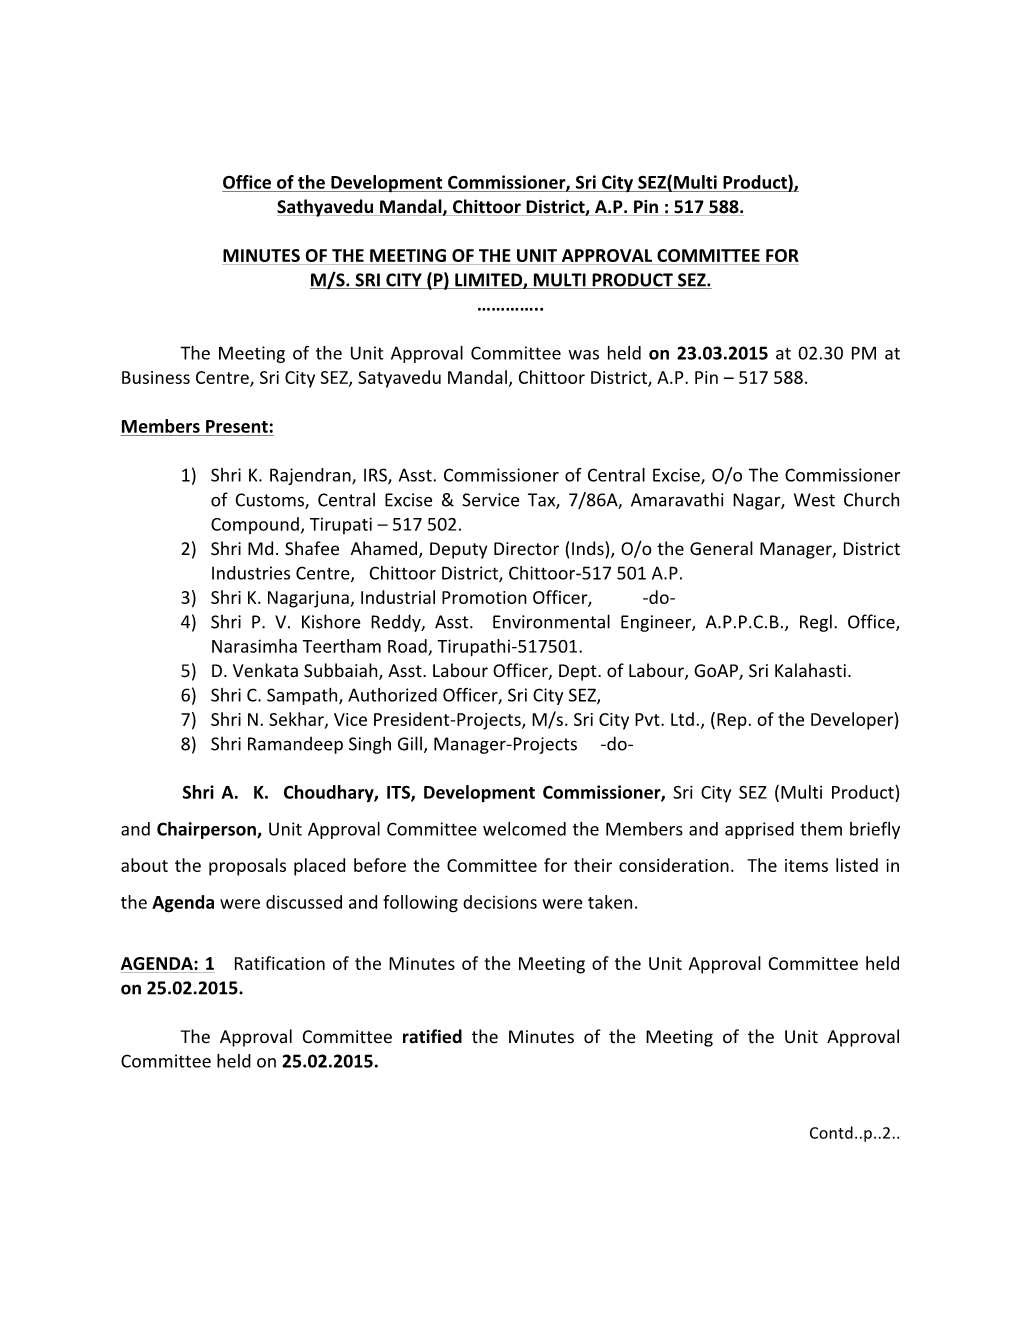 Office of the Development Commissioner, Sri City SEZ(Multi Product), Sathyavedu Mandal, Chittoor District, A.P